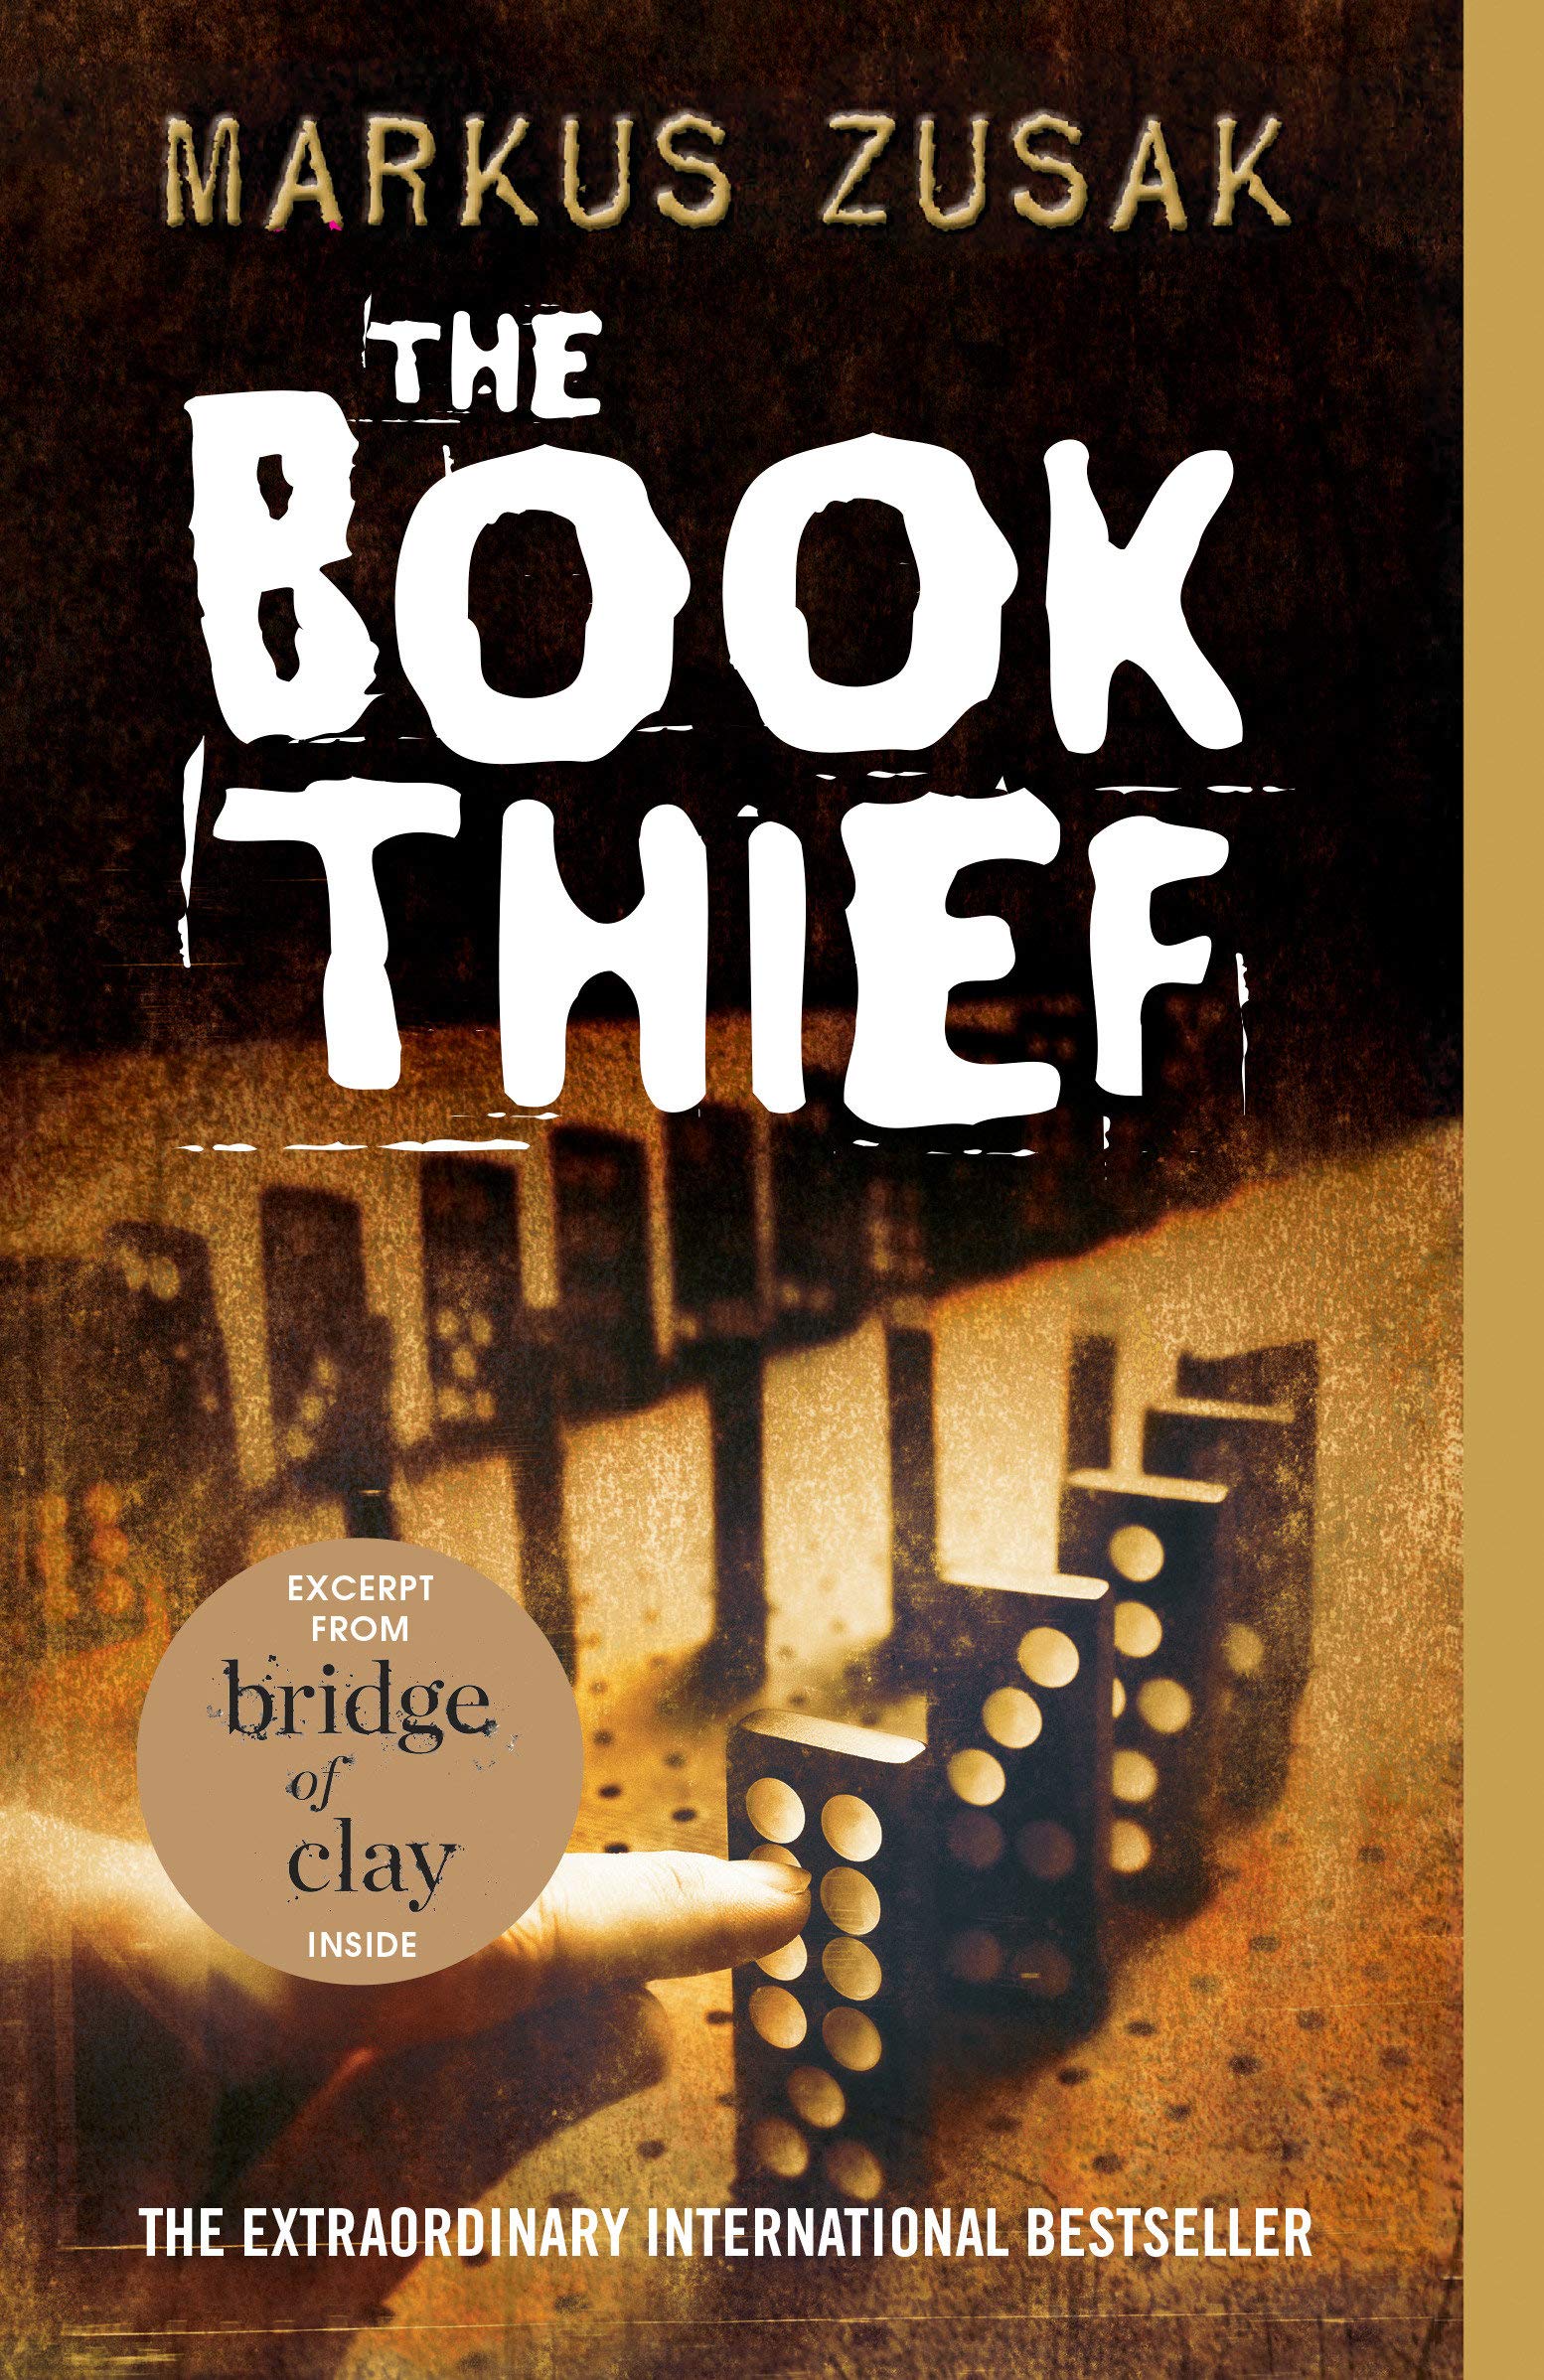 See The Book Thief in Library Catalog